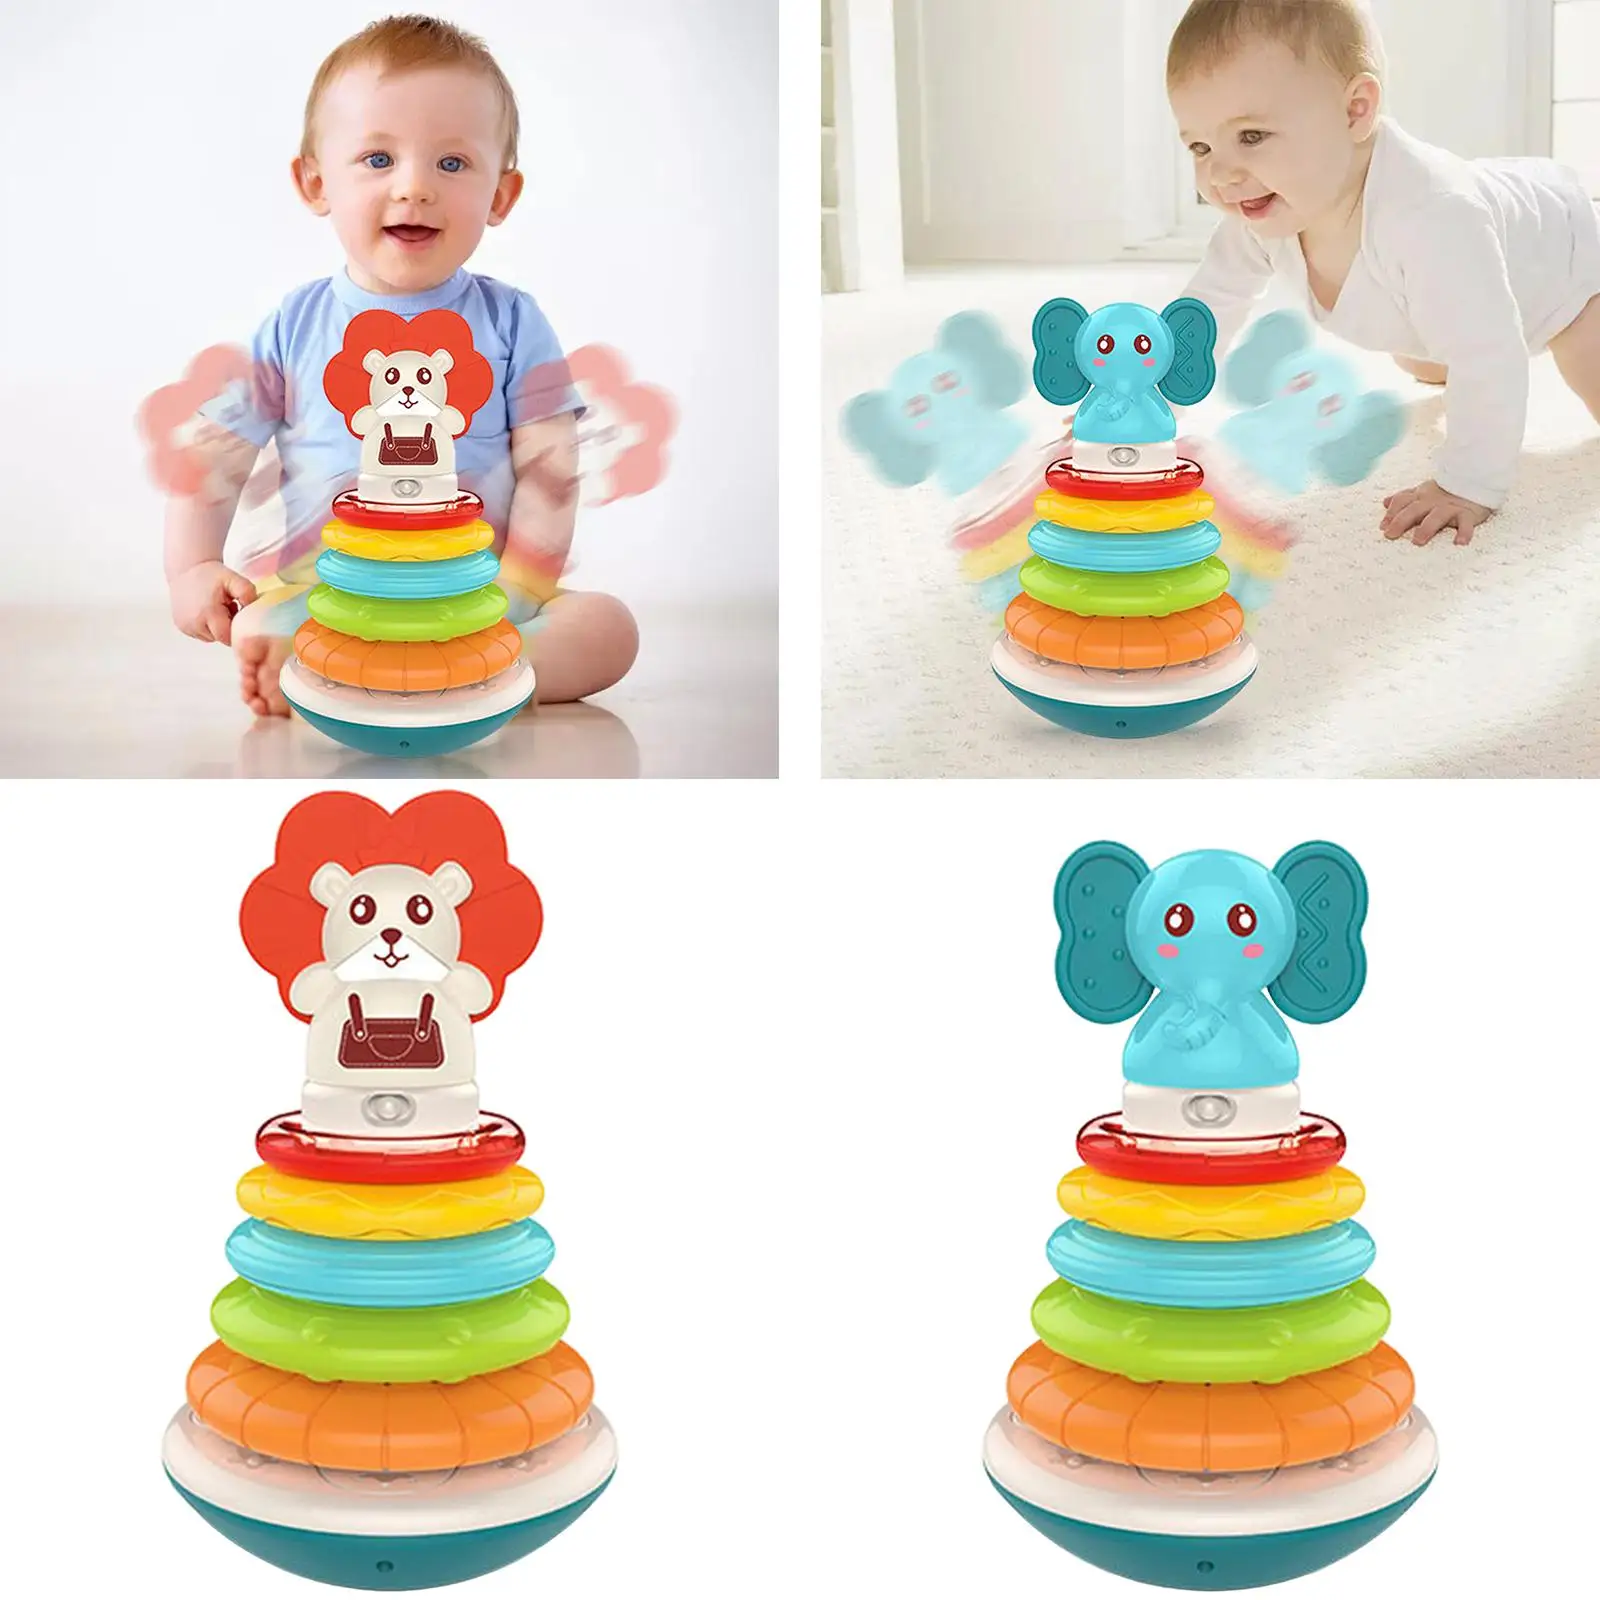 Stacking Toy Educational Toys Tumbler Toy for Babies 6 to 12 Months Infants